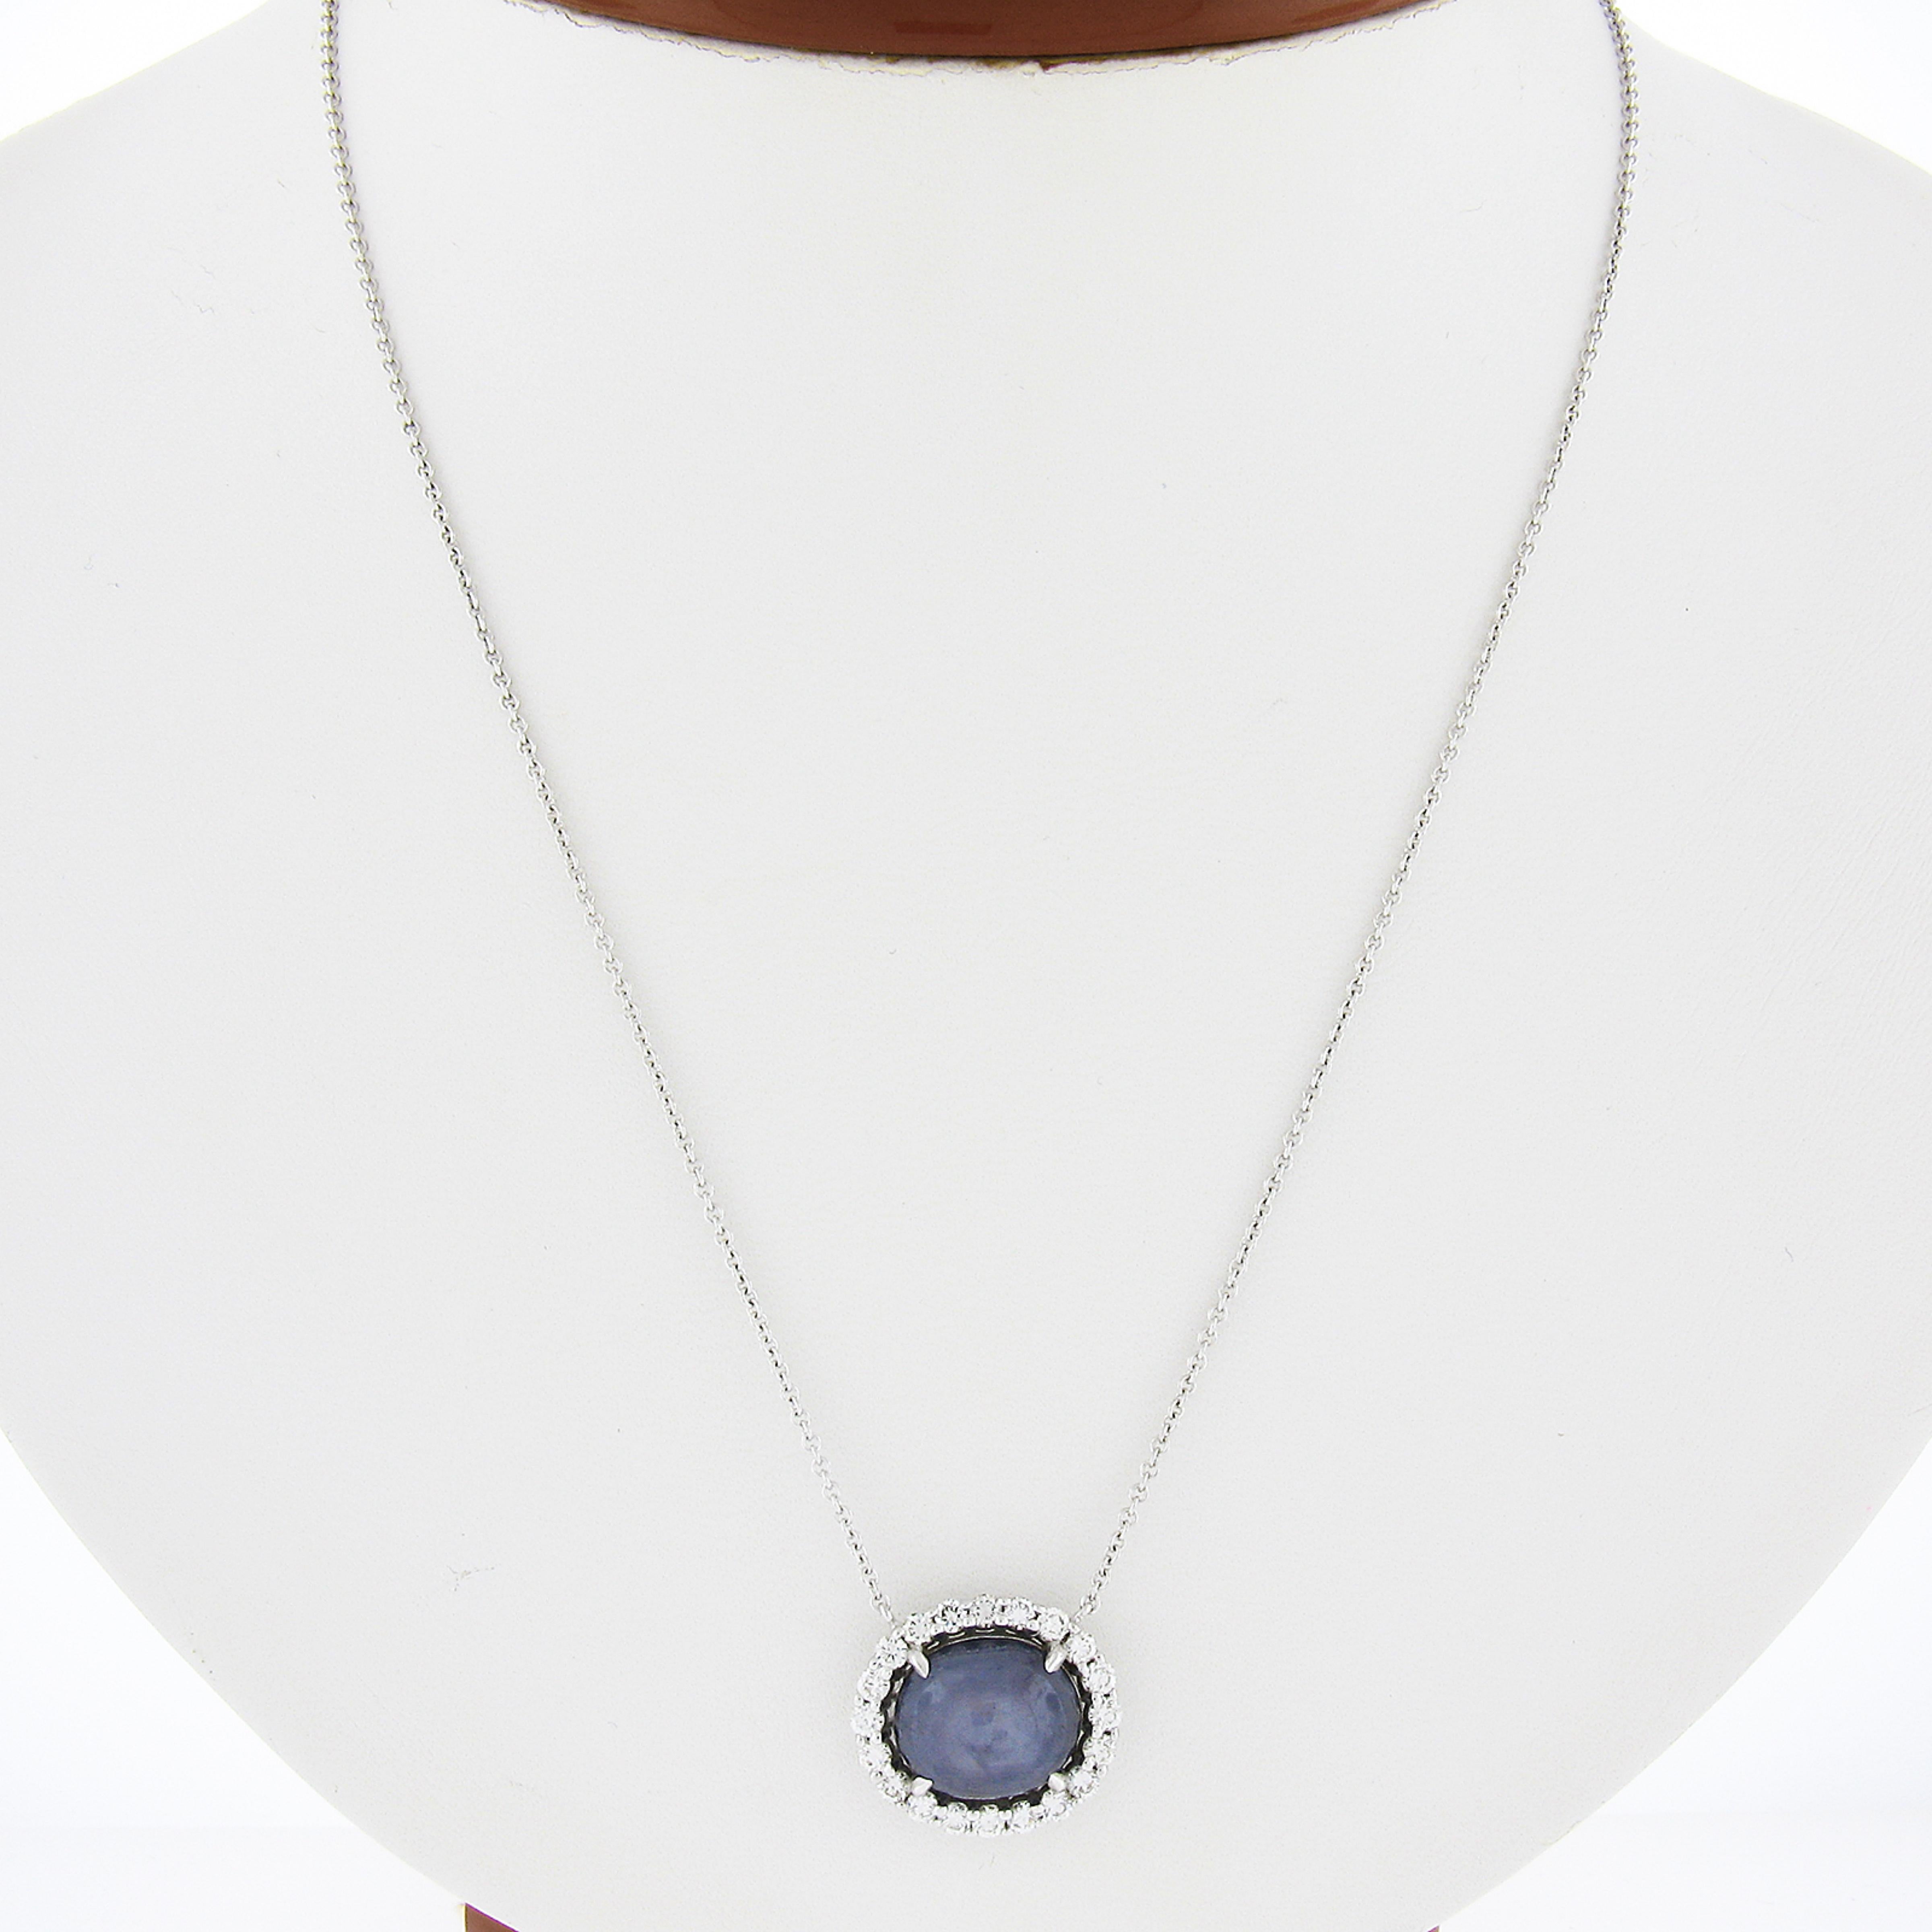 Here we have a truly breathtaking pendant necklace that is crafted in solid 14k white gold featuring a very fine, 100% natural, star sapphire neatly set at the center of a brilliant diamond halo. The oval cabochon cut solitaire is GIA certified and